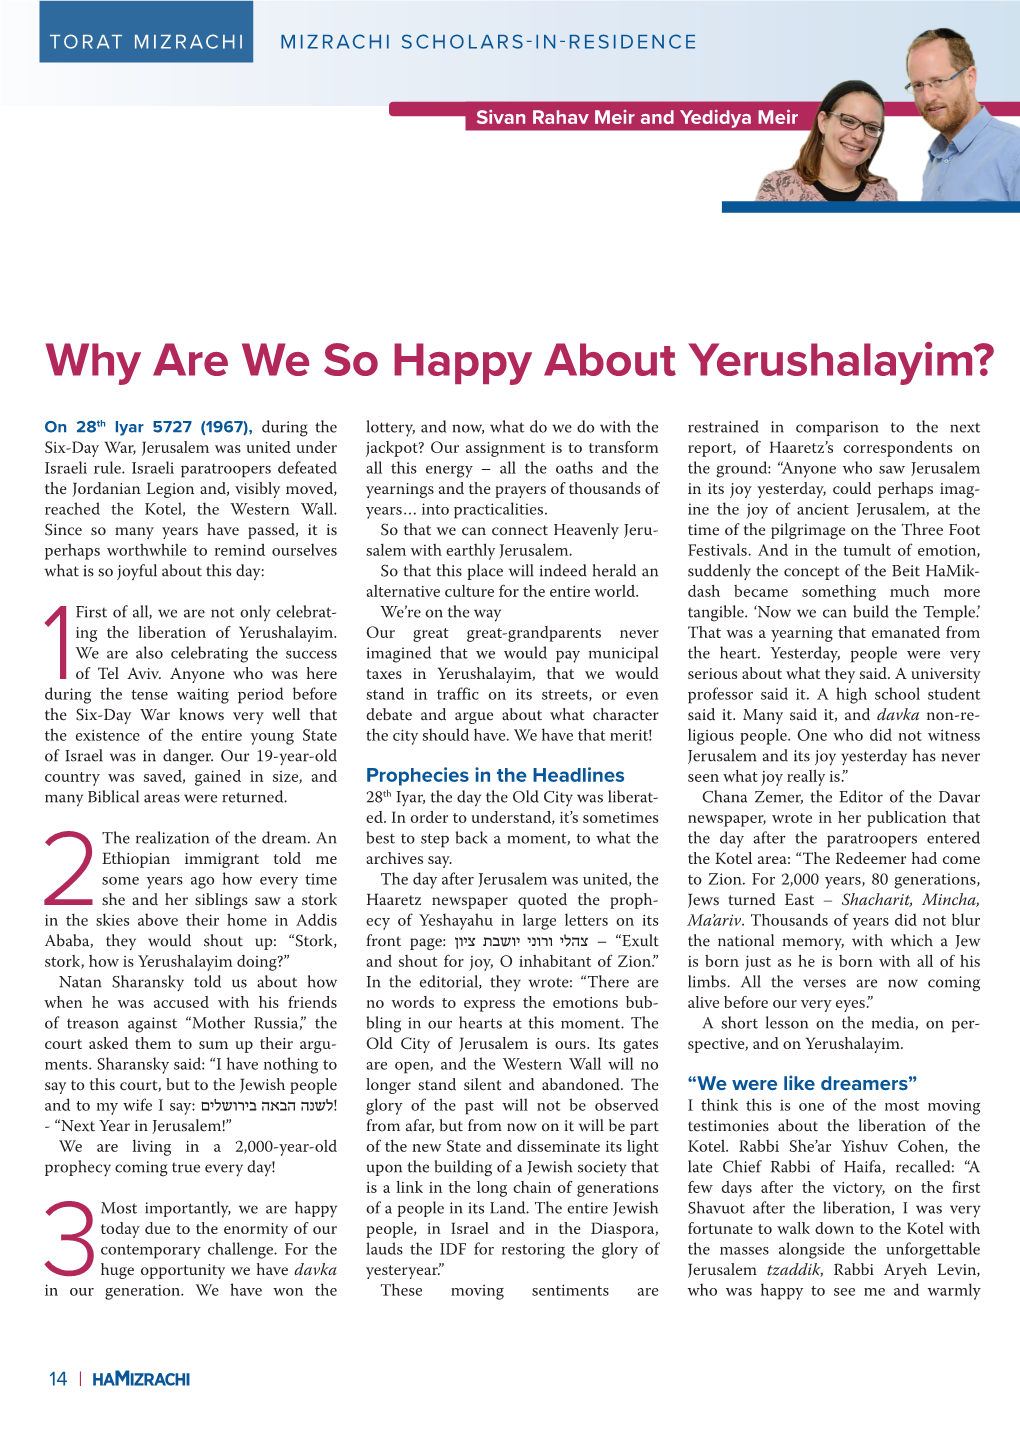 Why Are We So Happy About Yerushalayim?